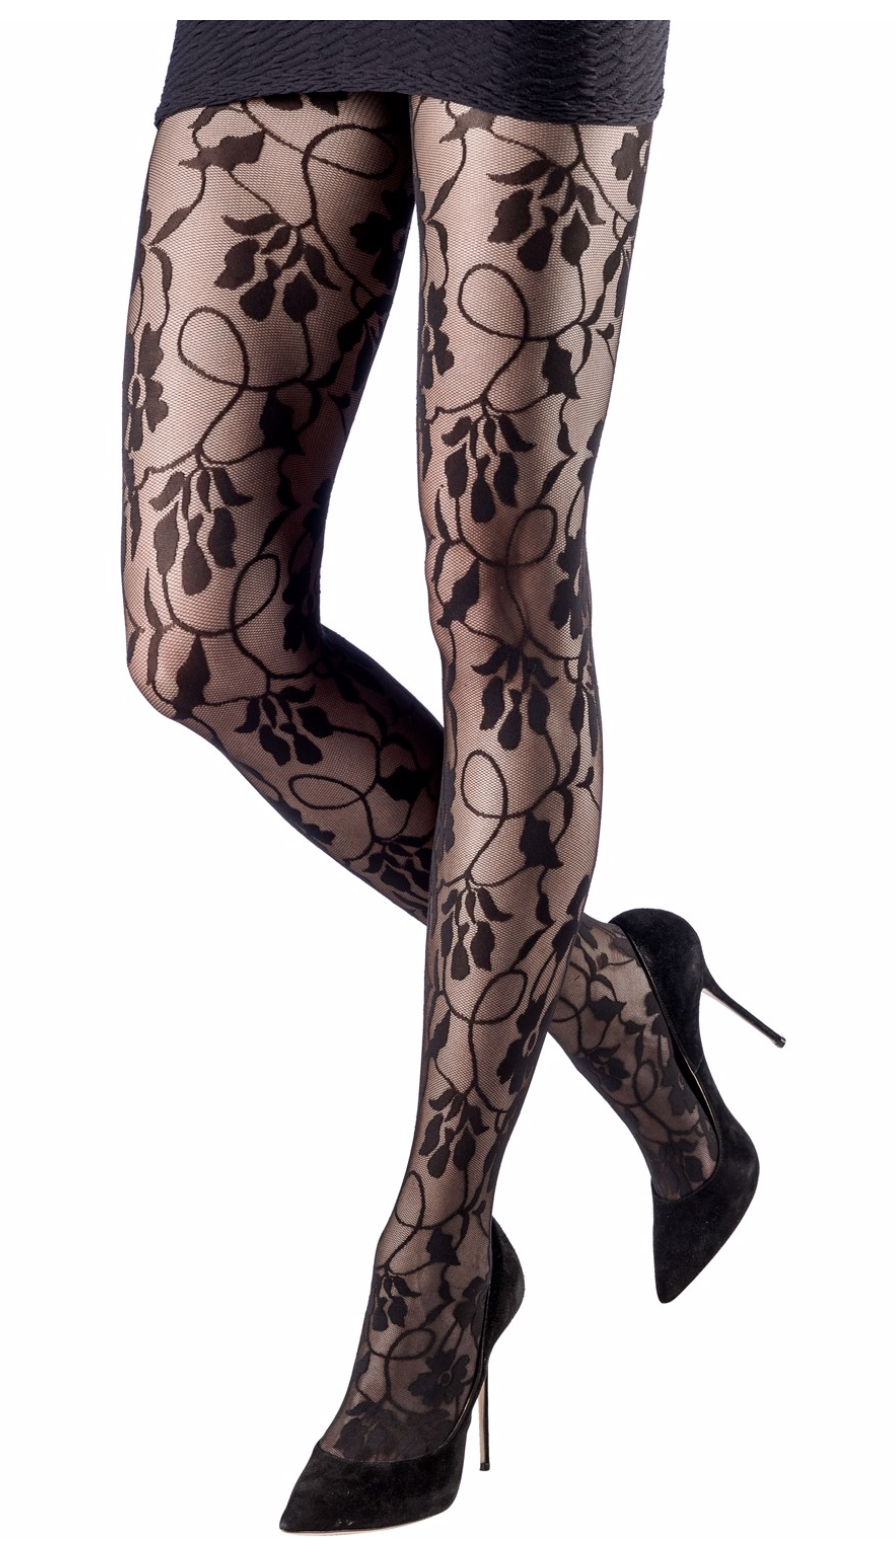 Lace tights - Black/Patterned - Ladies